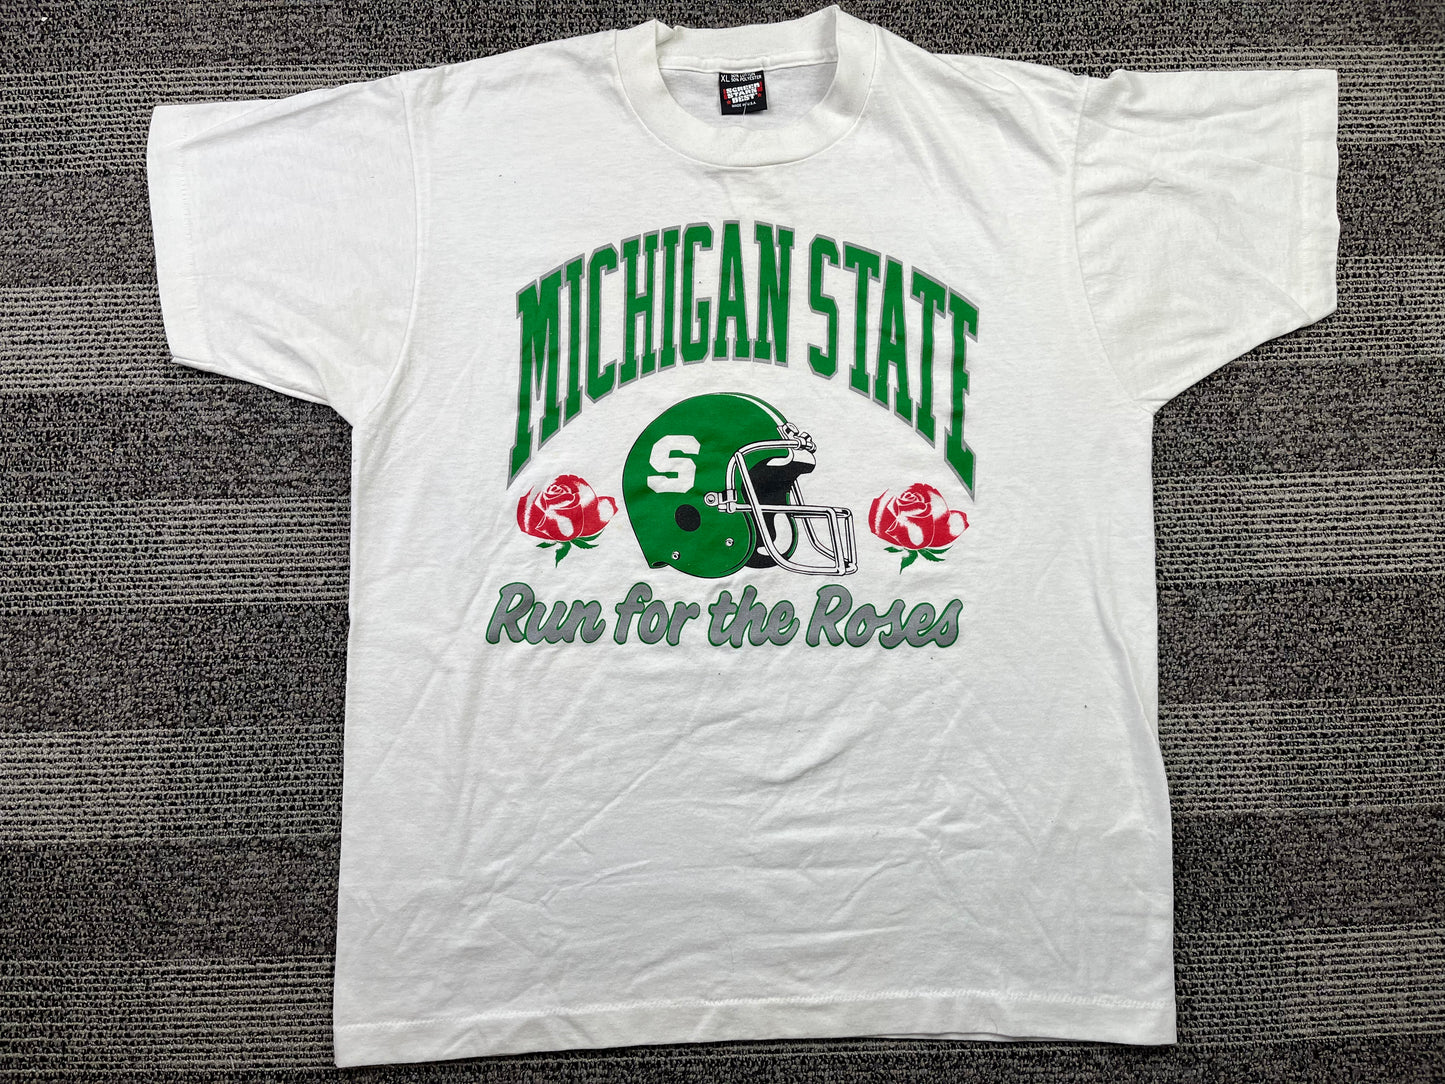 Michigan State “Run for the Roses” T-Shirt